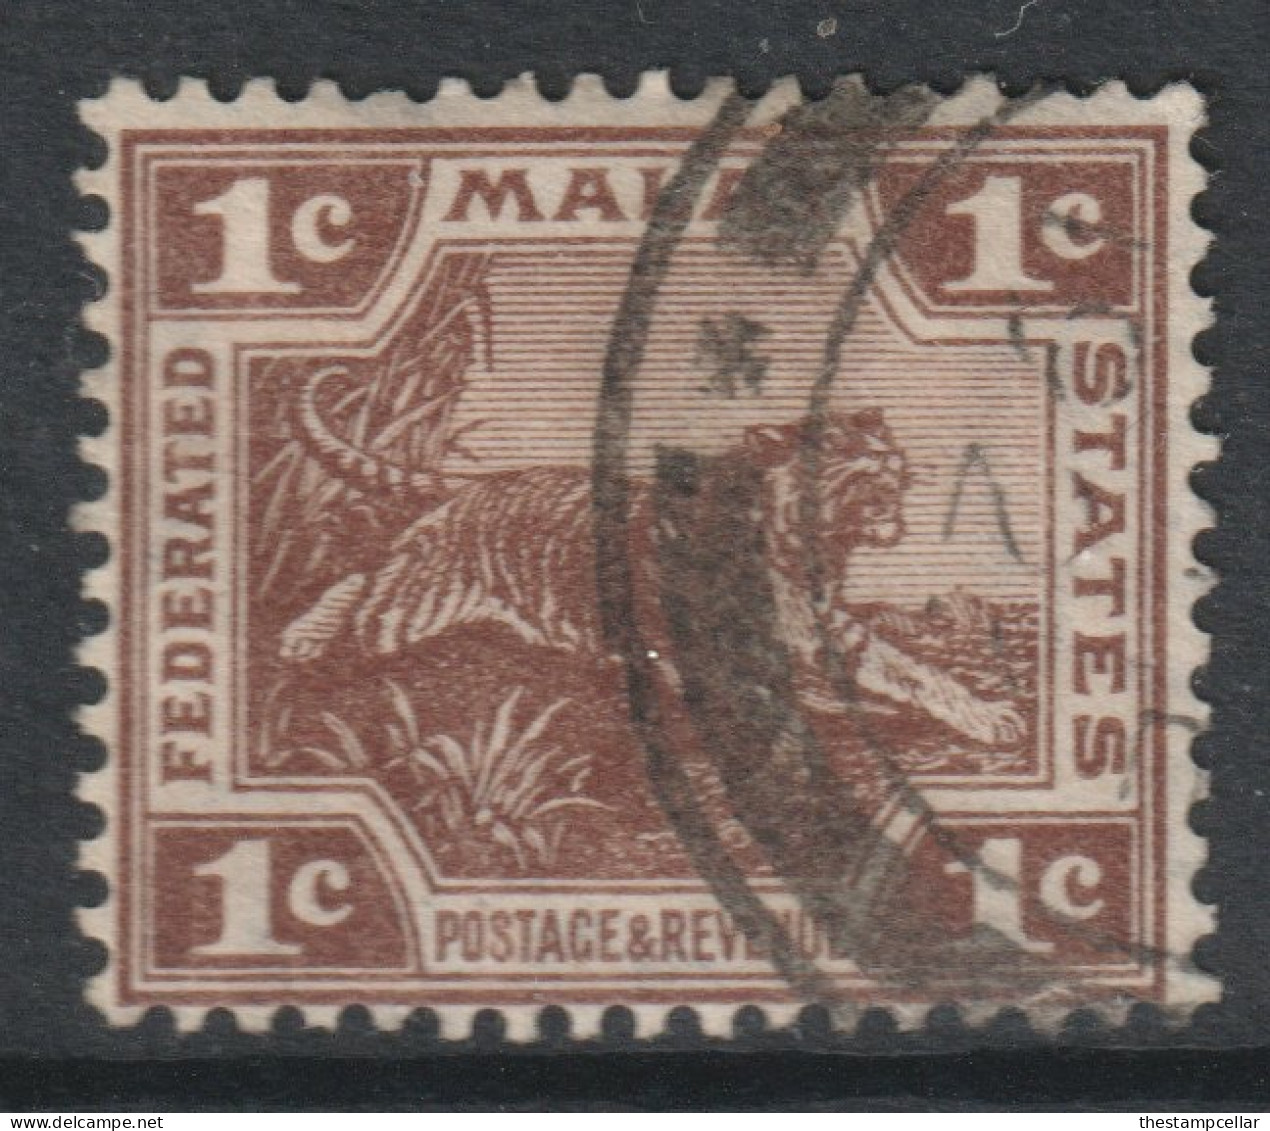 Malaya Federated States FMS Scott 49 - SG52, 1922 Leaping Tiger 1c Brown Used - Federated Malay States